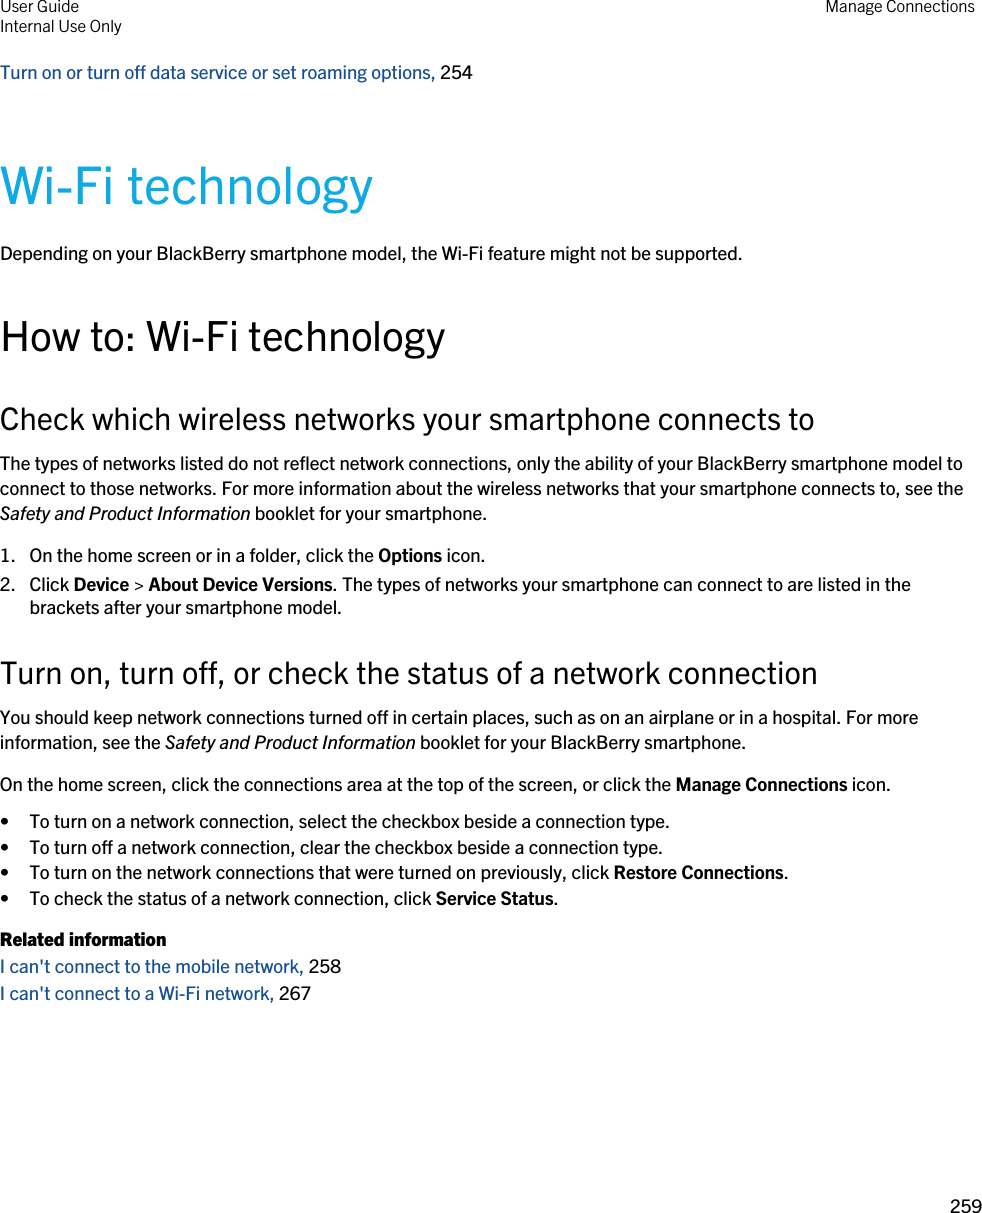 Turn on or turn off data service or set roaming options, 254 Wi-Fi technologyDepending on your BlackBerry smartphone model, the Wi-Fi feature might not be supported.How to: Wi-Fi technologyCheck which wireless networks your smartphone connects toThe types of networks listed do not reflect network connections, only the ability of your BlackBerry smartphone model to connect to those networks. For more information about the wireless networks that your smartphone connects to, see the Safety and Product Information booklet for your smartphone.1. On the home screen or in a folder, click the Options icon.2. Click Device &gt; About Device Versions. The types of networks your smartphone can connect to are listed in the brackets after your smartphone model.Turn on, turn off, or check the status of a network connectionYou should keep network connections turned off in certain places, such as on an airplane or in a hospital. For more information, see the Safety and Product Information booklet for your BlackBerry smartphone.On the home screen, click the connections area at the top of the screen, or click the Manage Connections icon.• To turn on a network connection, select the checkbox beside a connection type.• To turn off a network connection, clear the checkbox beside a connection type.• To turn on the network connections that were turned on previously, click Restore Connections.• To check the status of a network connection, click Service Status.Related informationI can&apos;t connect to the mobile network, 258 I can&apos;t connect to a Wi-Fi network, 267User GuideInternal Use Only Manage Connections259 